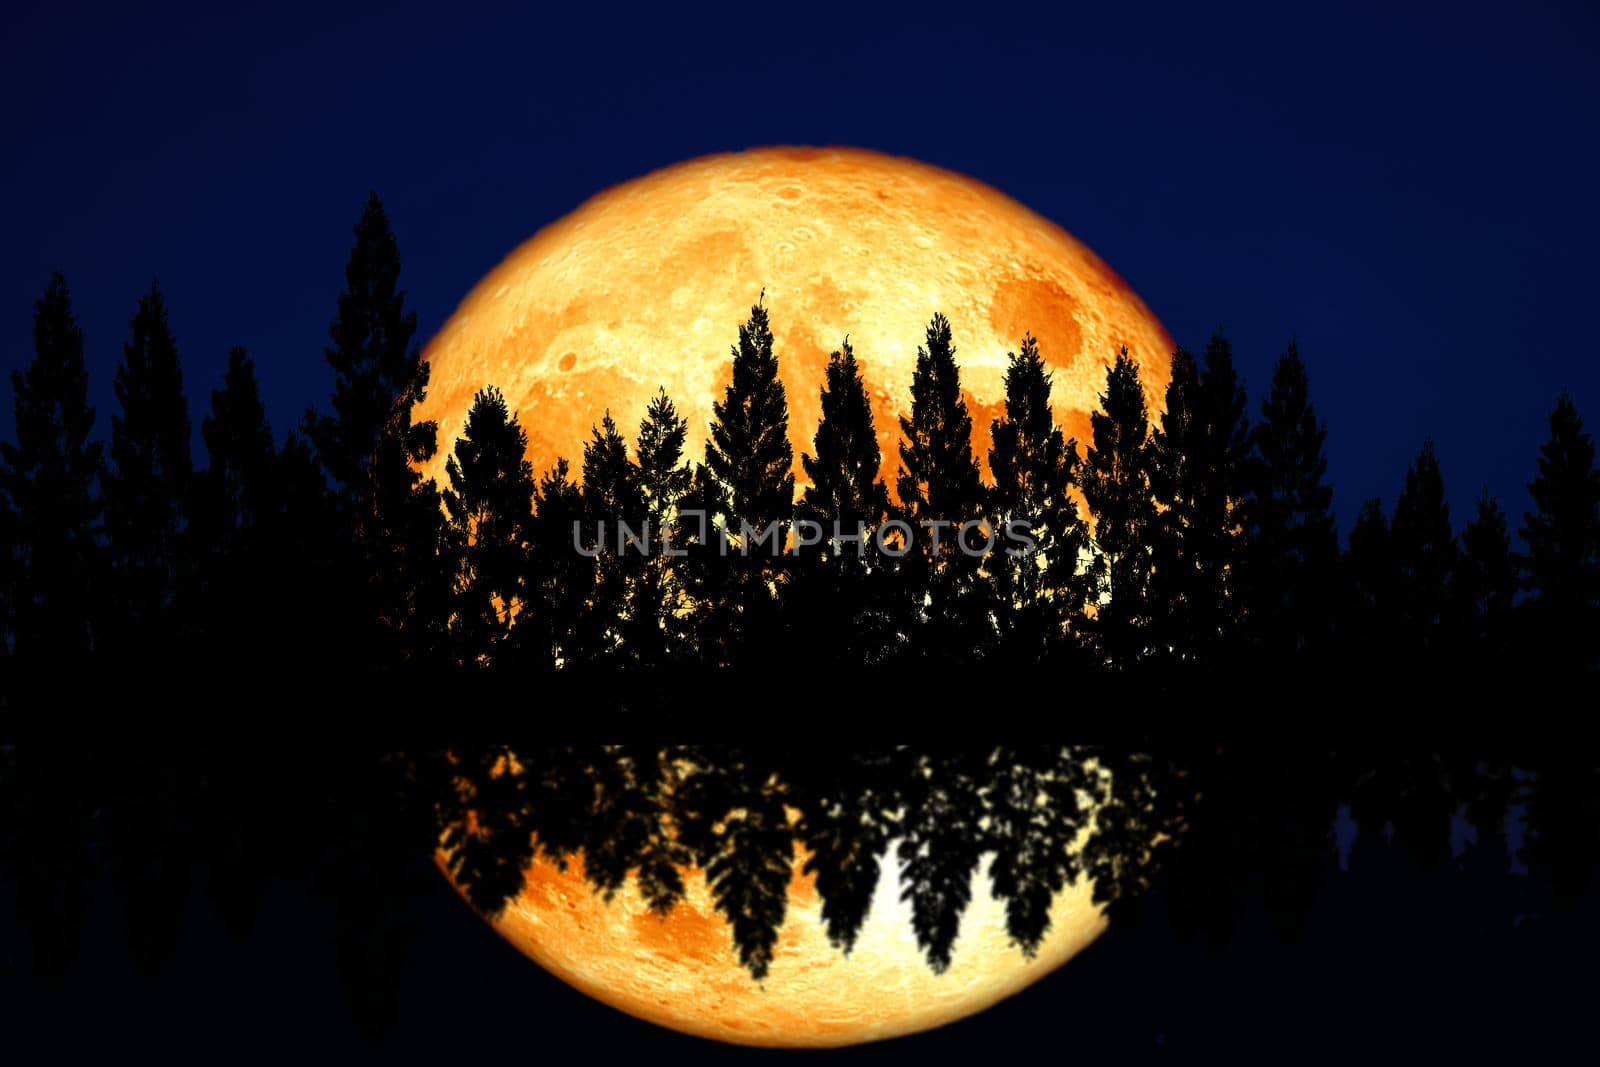 reflection super corn planting blood moon rise back top pine clear cloud on the night sky